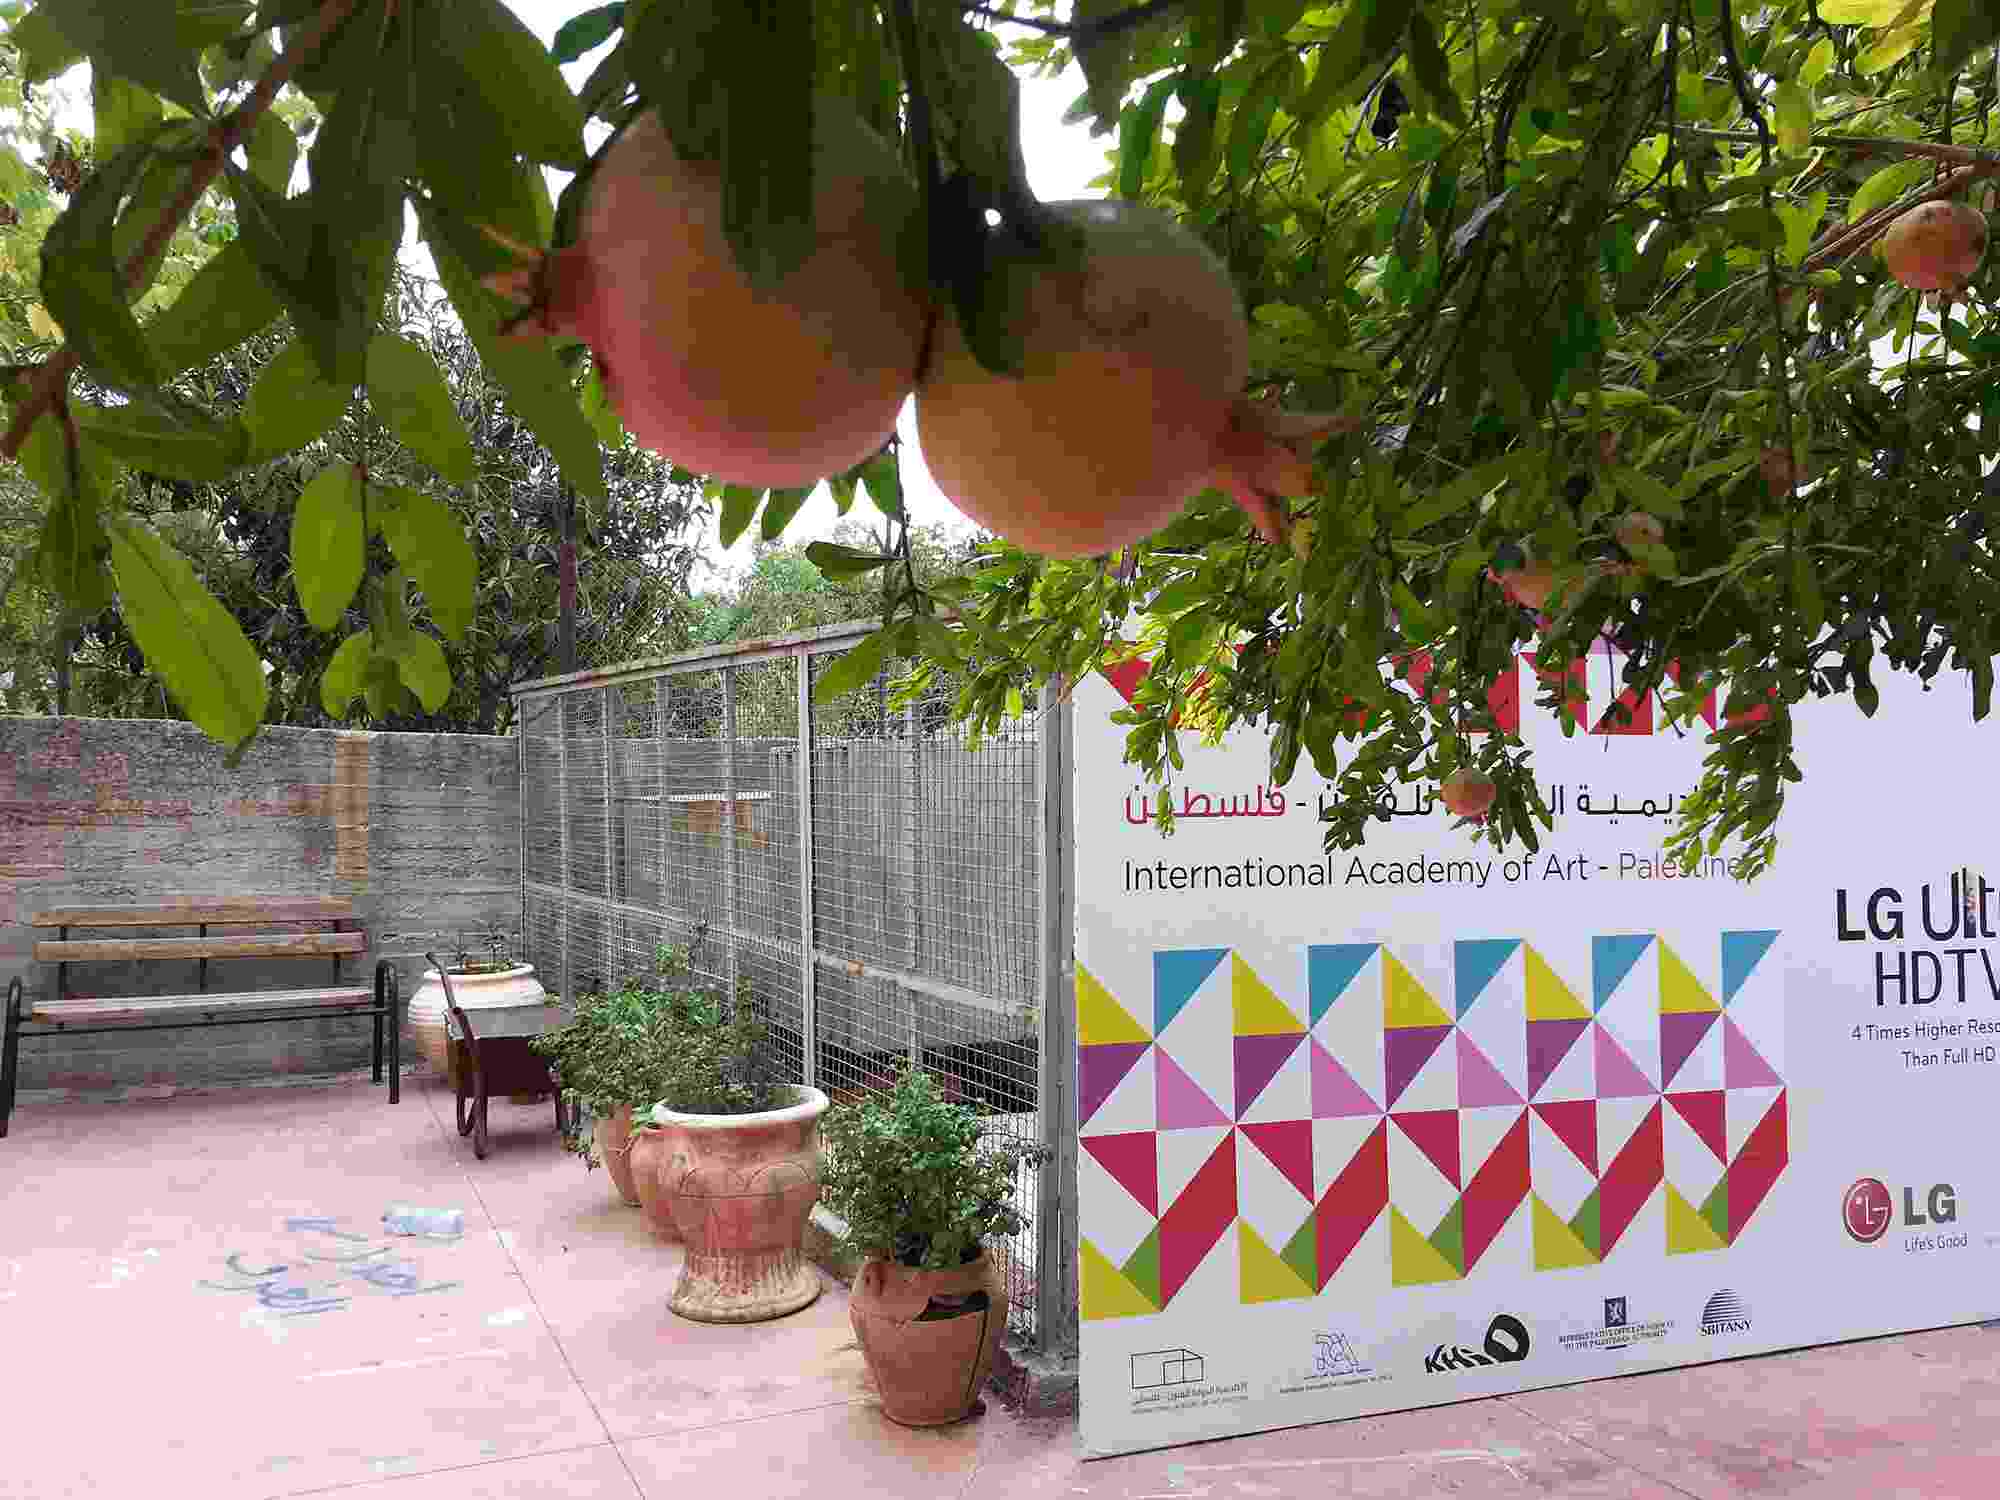 Pomegranate fruit hang from a tree in the foreground, with a courtyard and potted plants visible behind